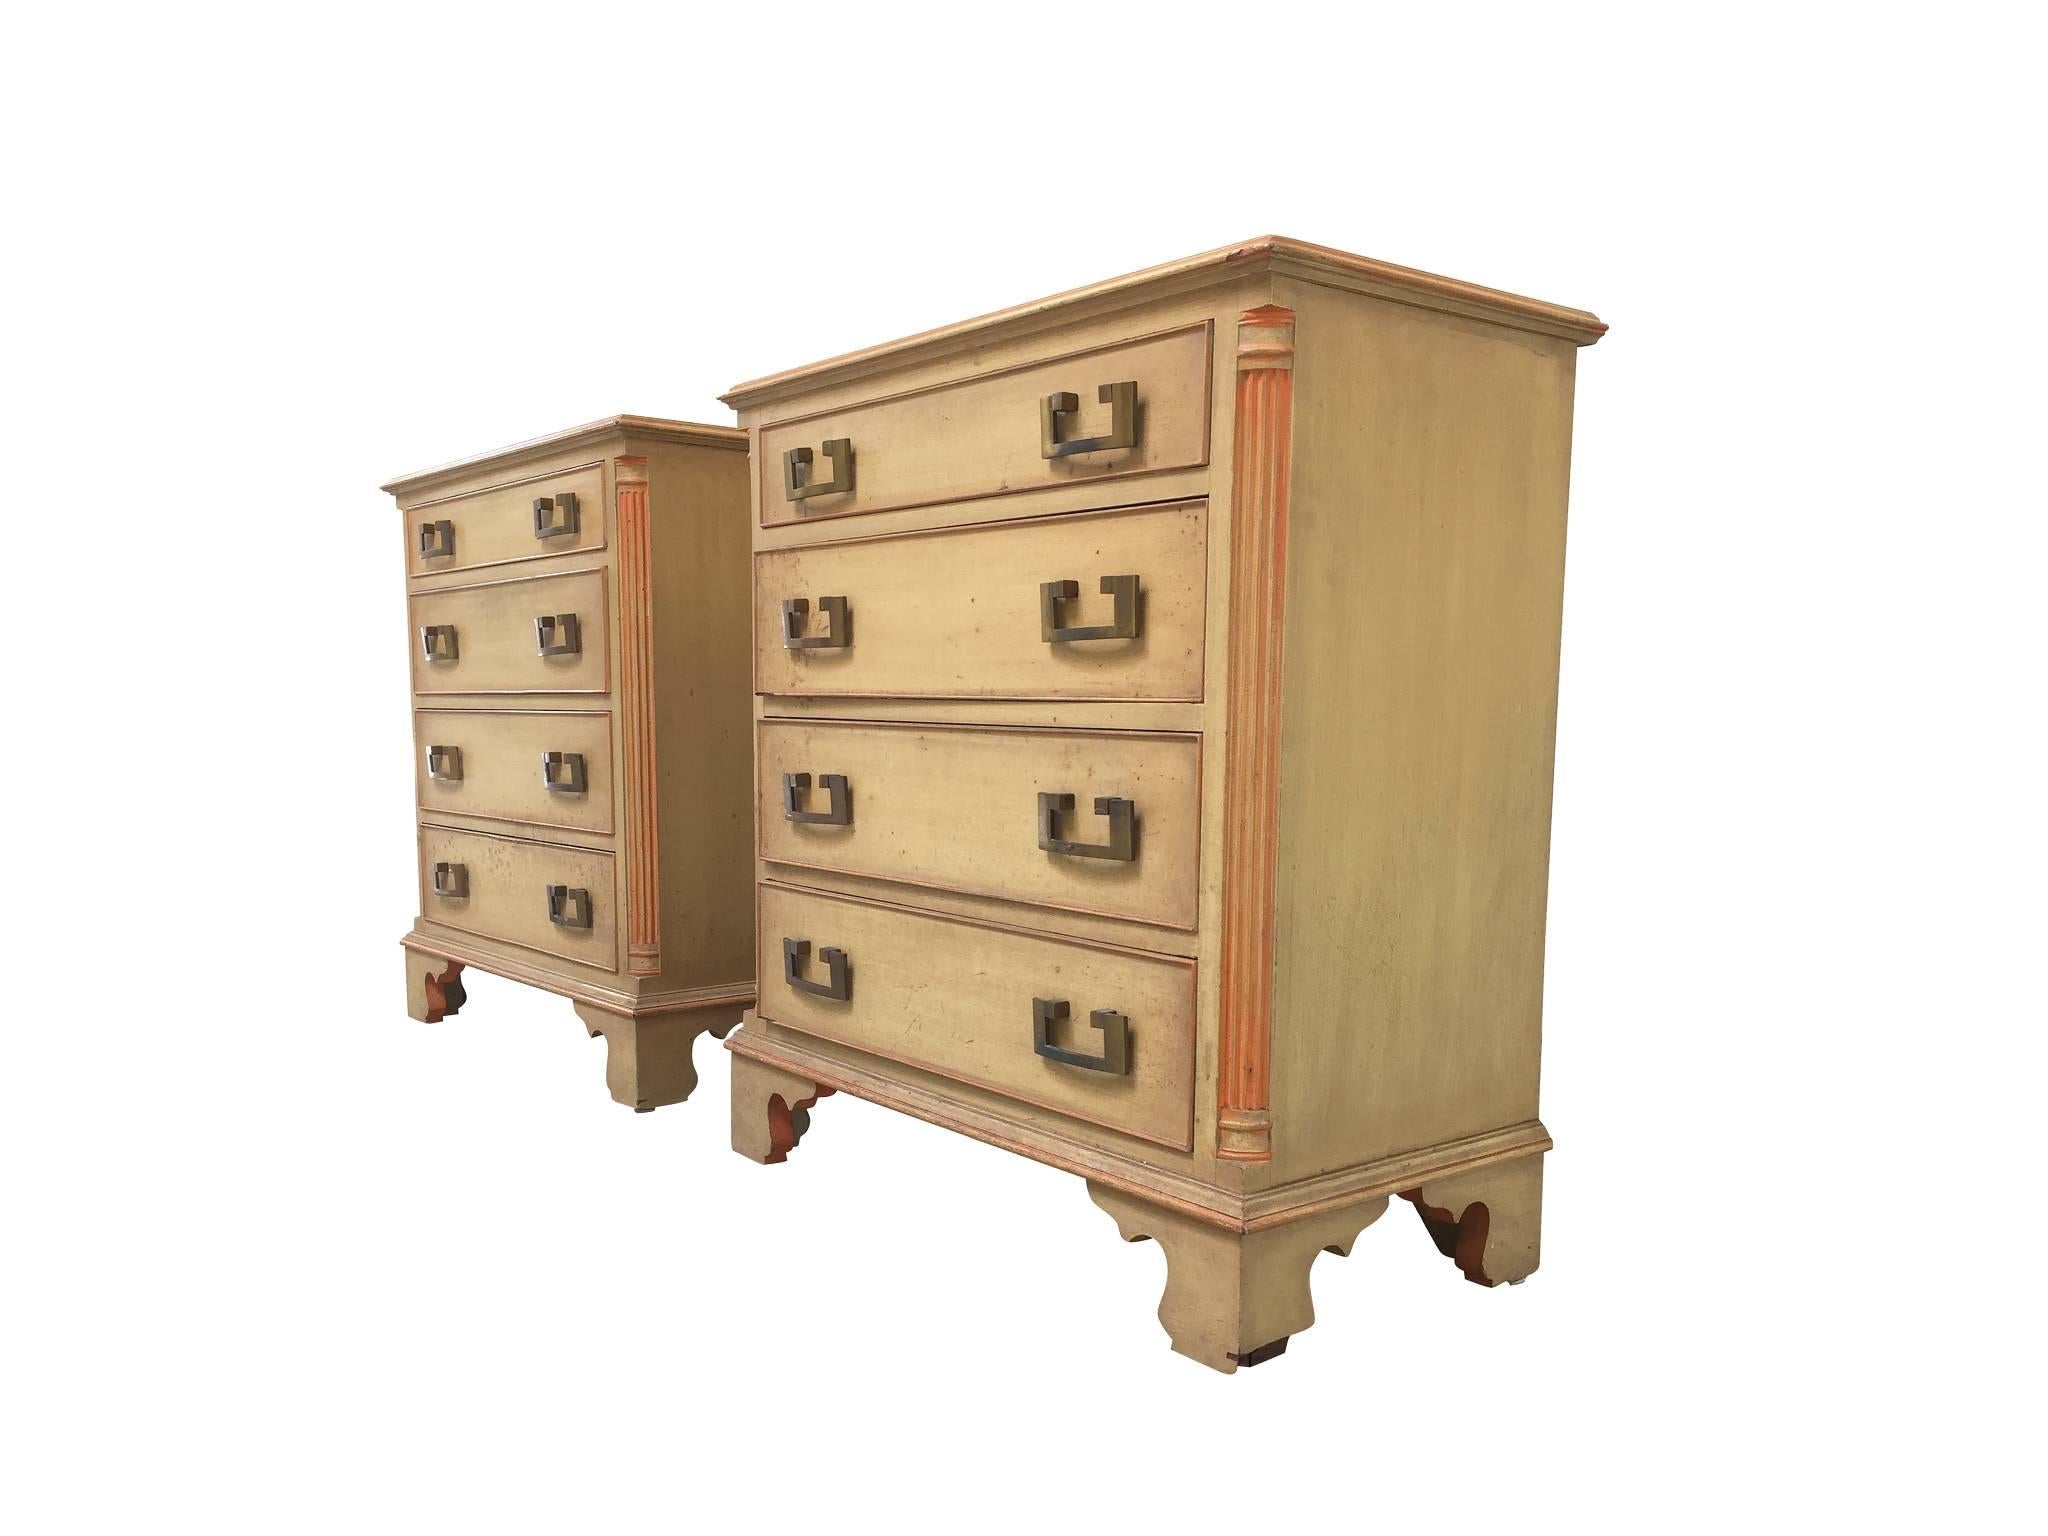 These chests of drawers not only provide ample storage space for your home, they also offer a touch of charm and a bright palette. They were crafted in the 1950s-1960s by the Kittinger Furniture Company. They are comprised of maple wood with recent